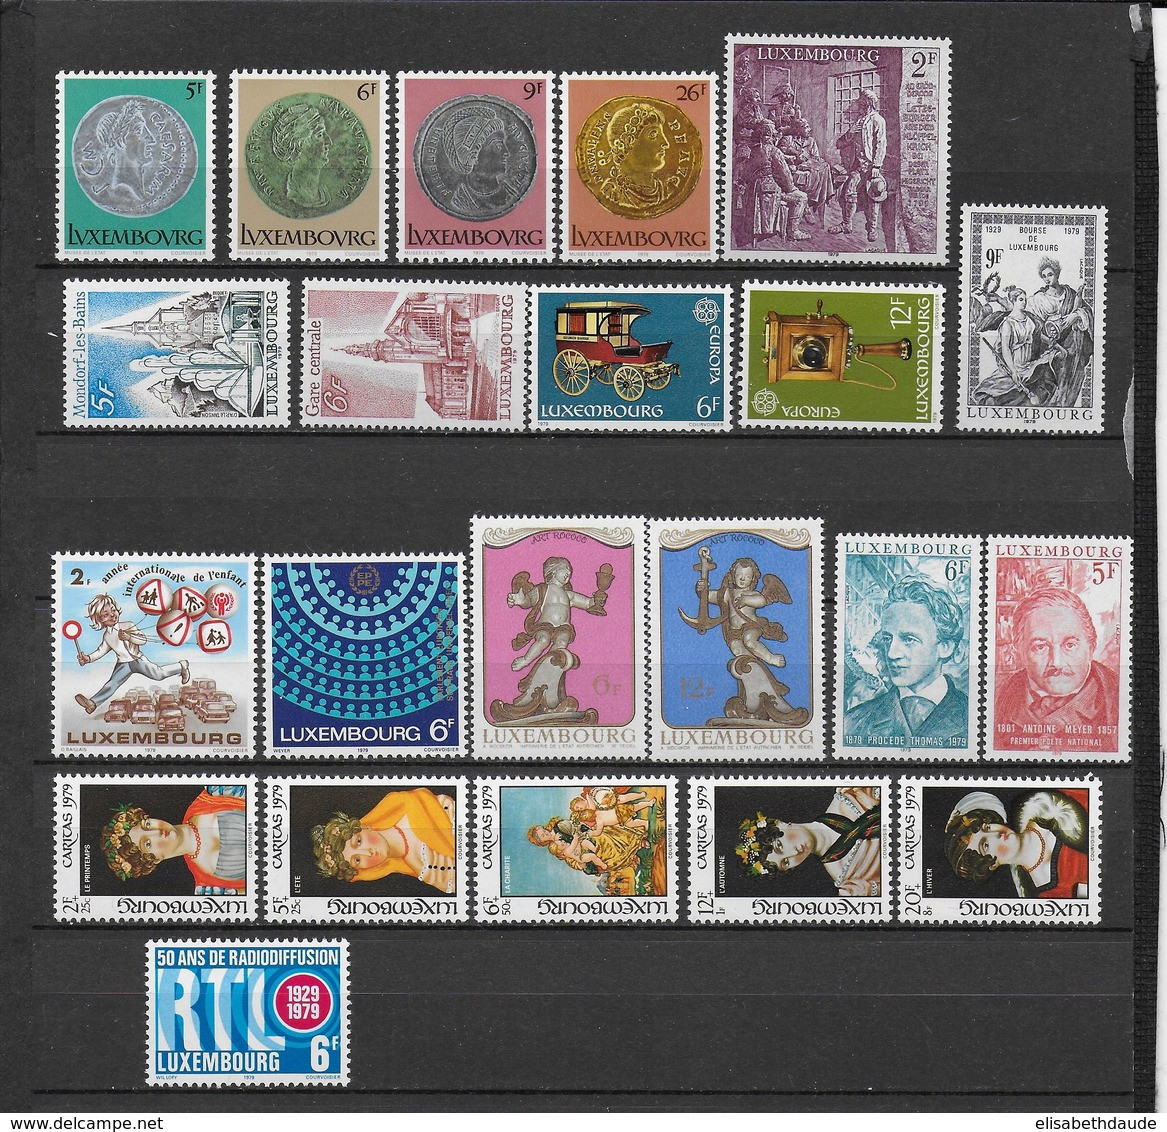 LUXEMBOURG - ANNEE COMPLETE 1979 ** MNH - - Années Complètes